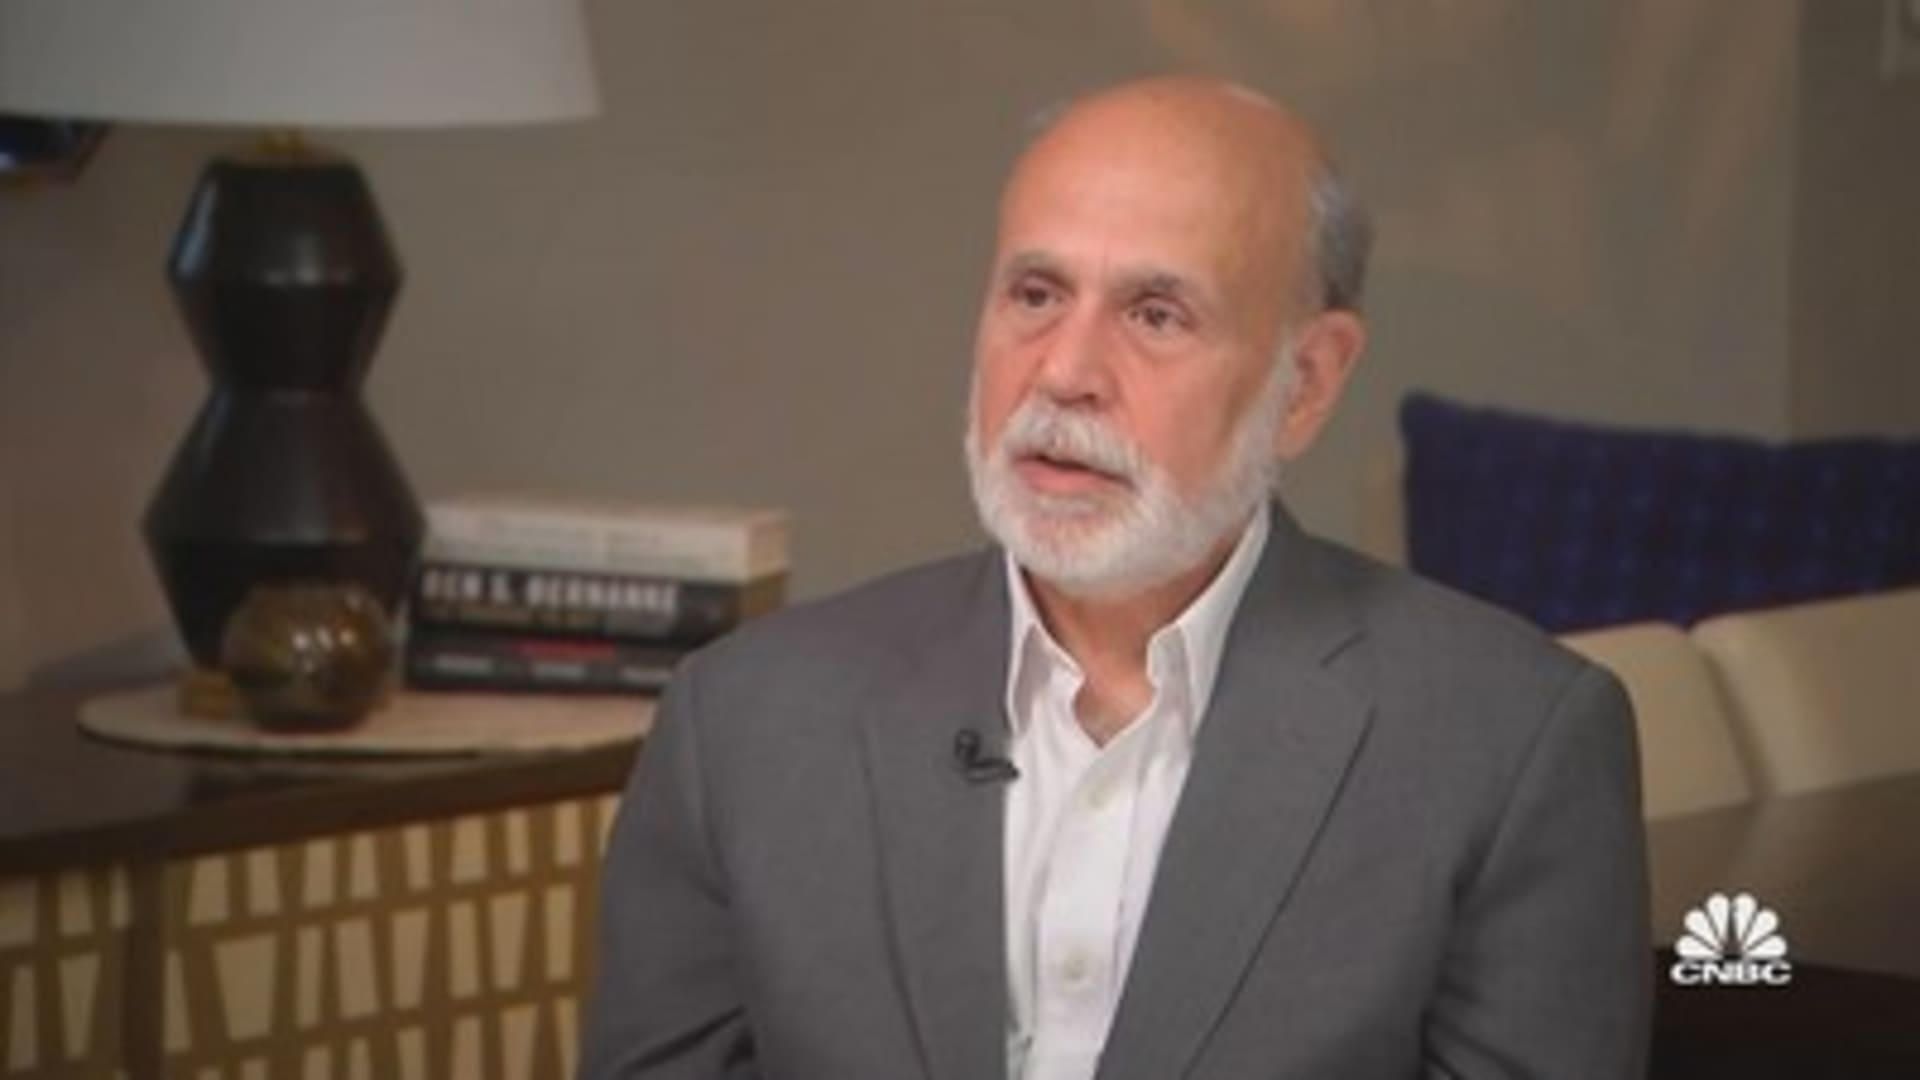 Ben Bernanke on the Fed's response to inflation